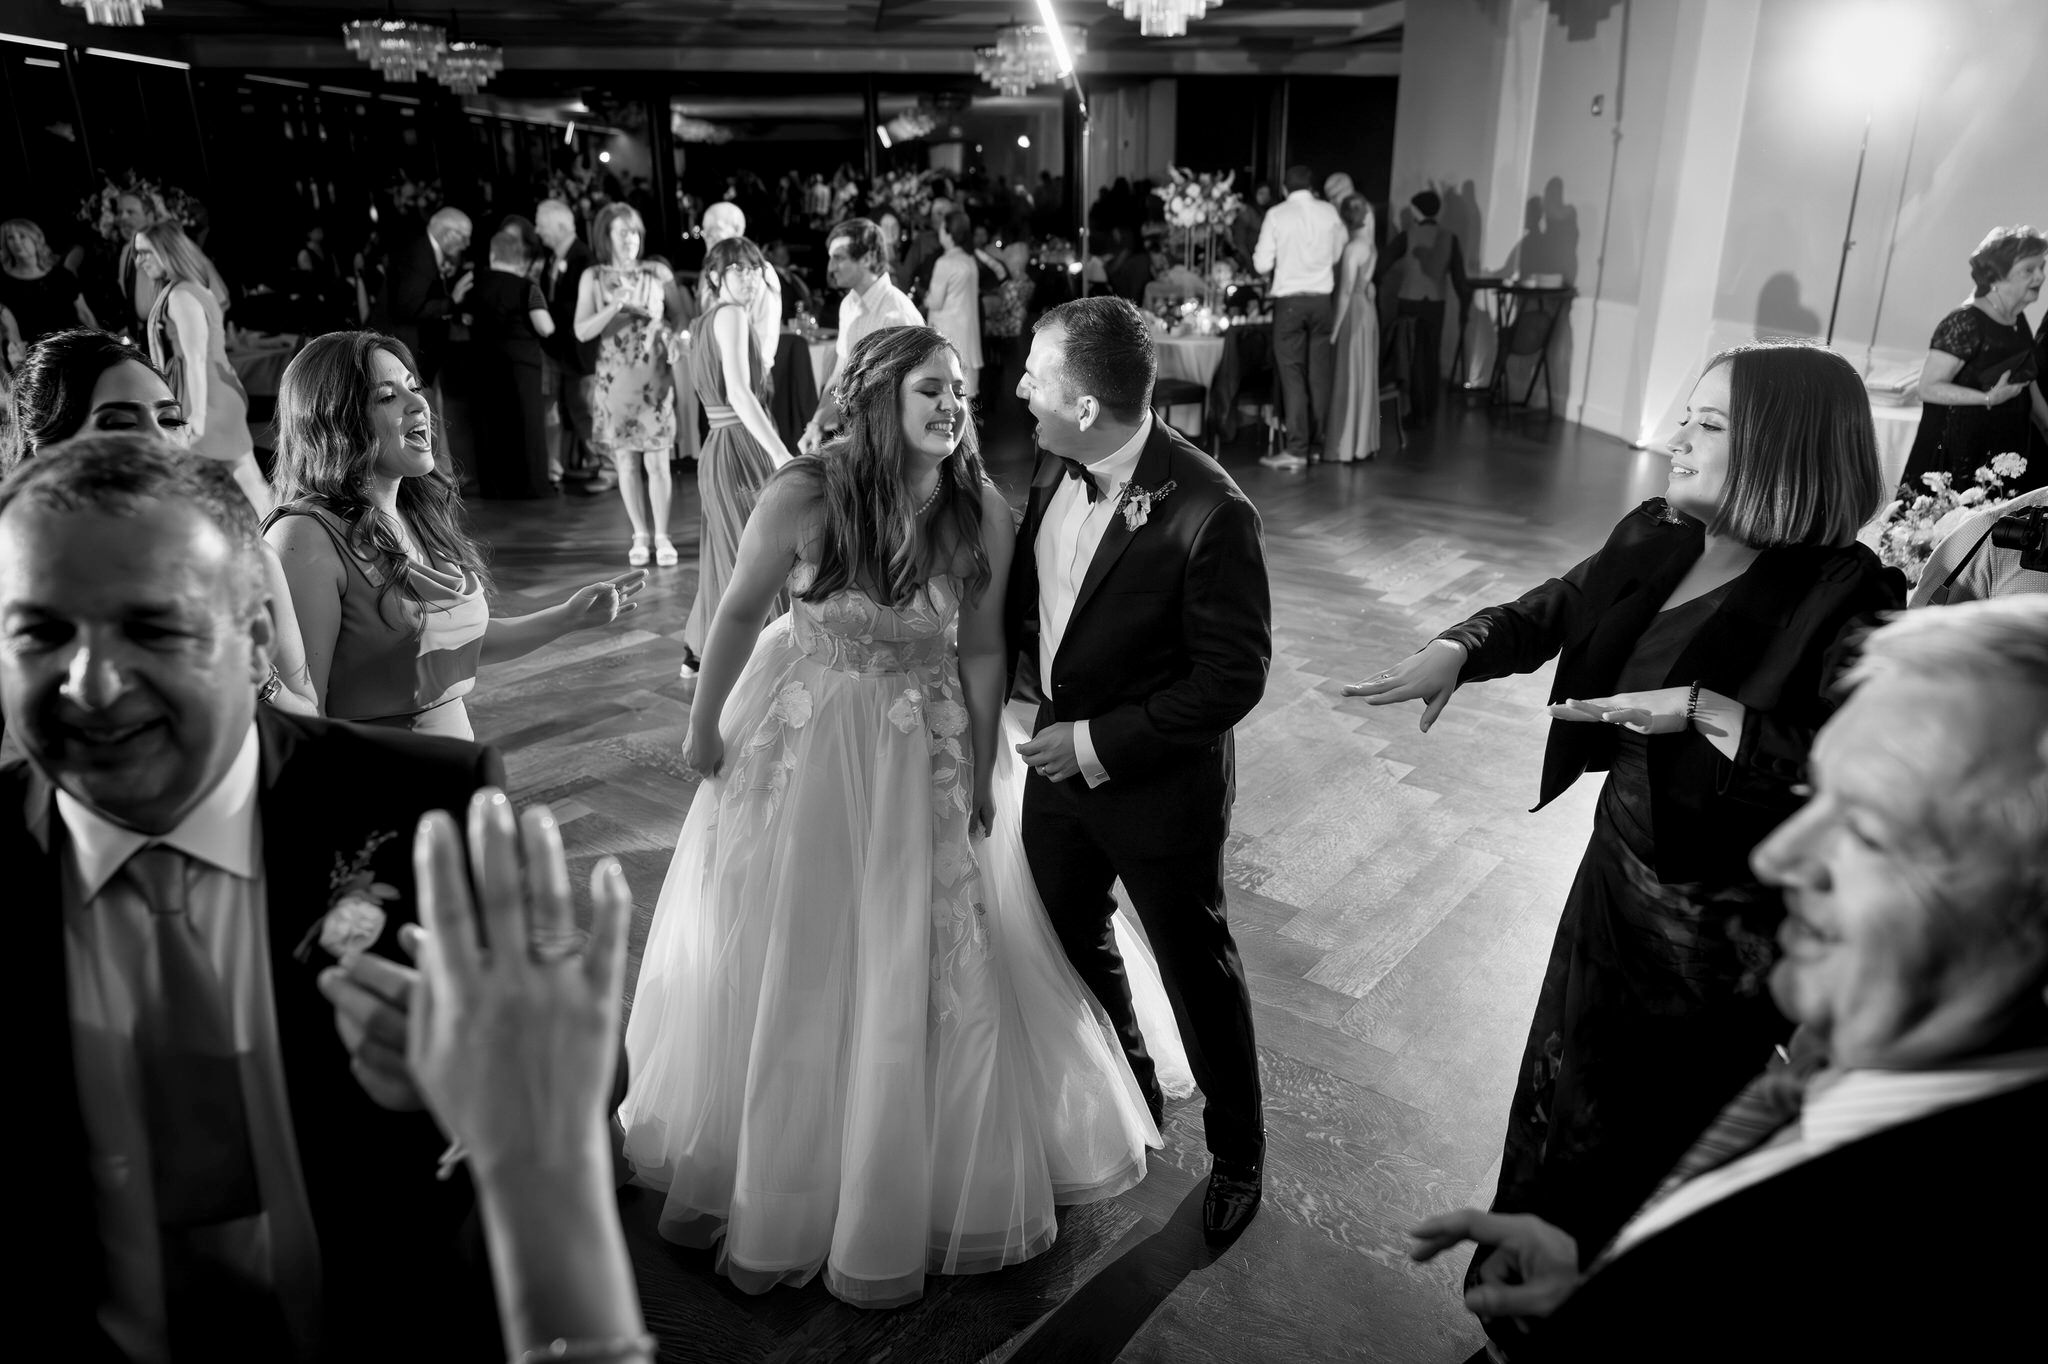 Guests dance at a wedding at the War Memorial in Grosse Pointe Farms. 